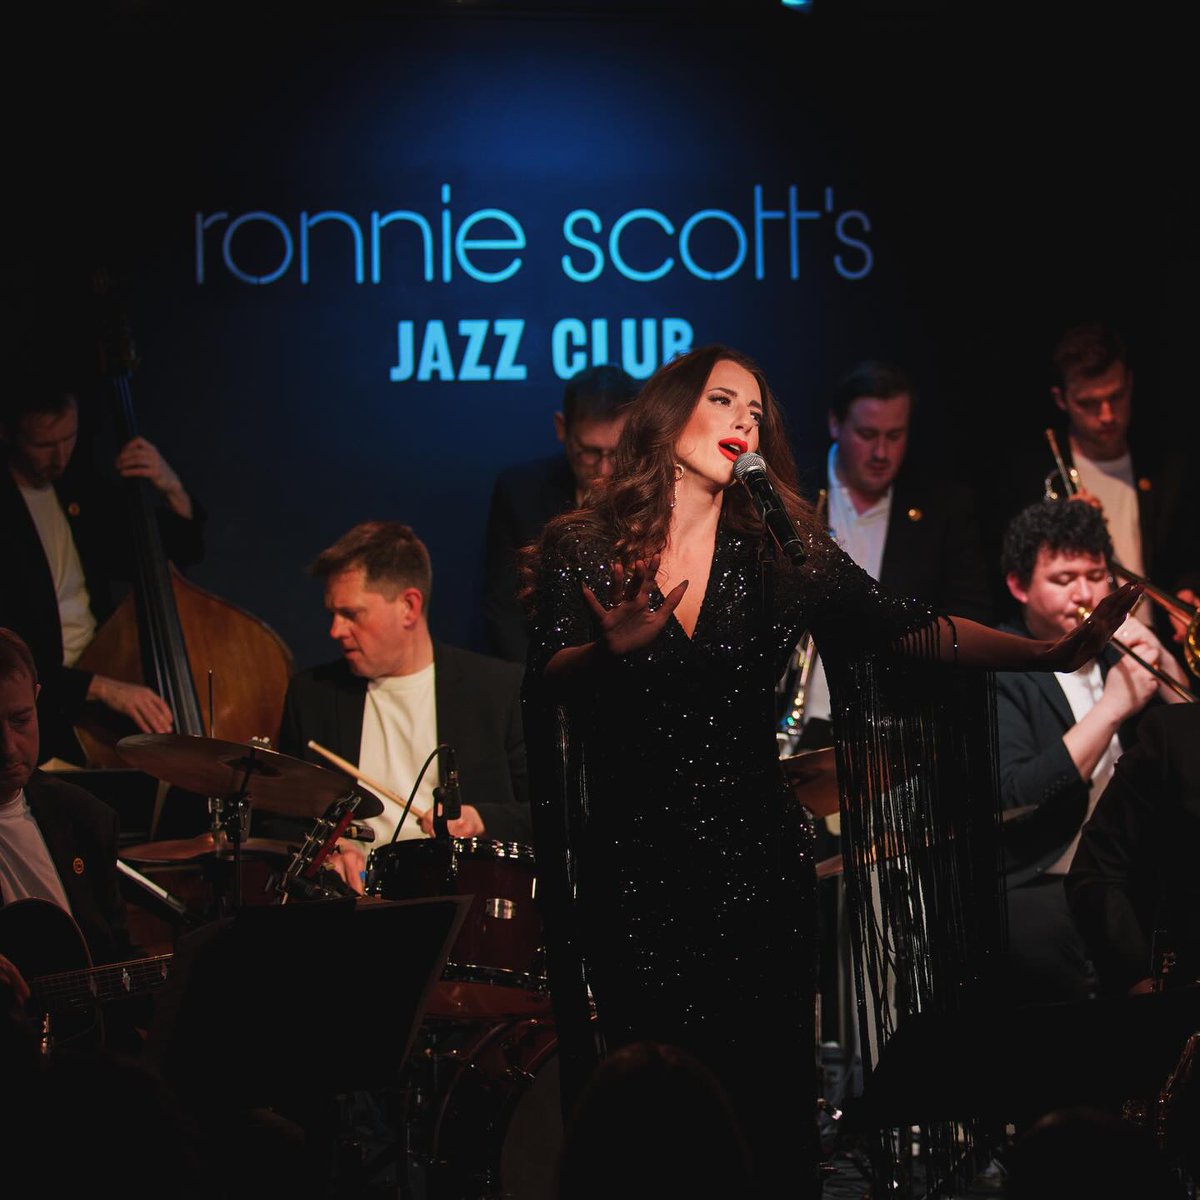 We are beyond excited that the brilliant @EmmaSmith_Music will be bringing her 'She Sings Sinatra' project with an all star Big band to @StEdsCanterbury on Friday 20 September! A sell out @officialronnies plan a weekend in lovely Canterbury! Tickets VERY SOON! #ticketsource